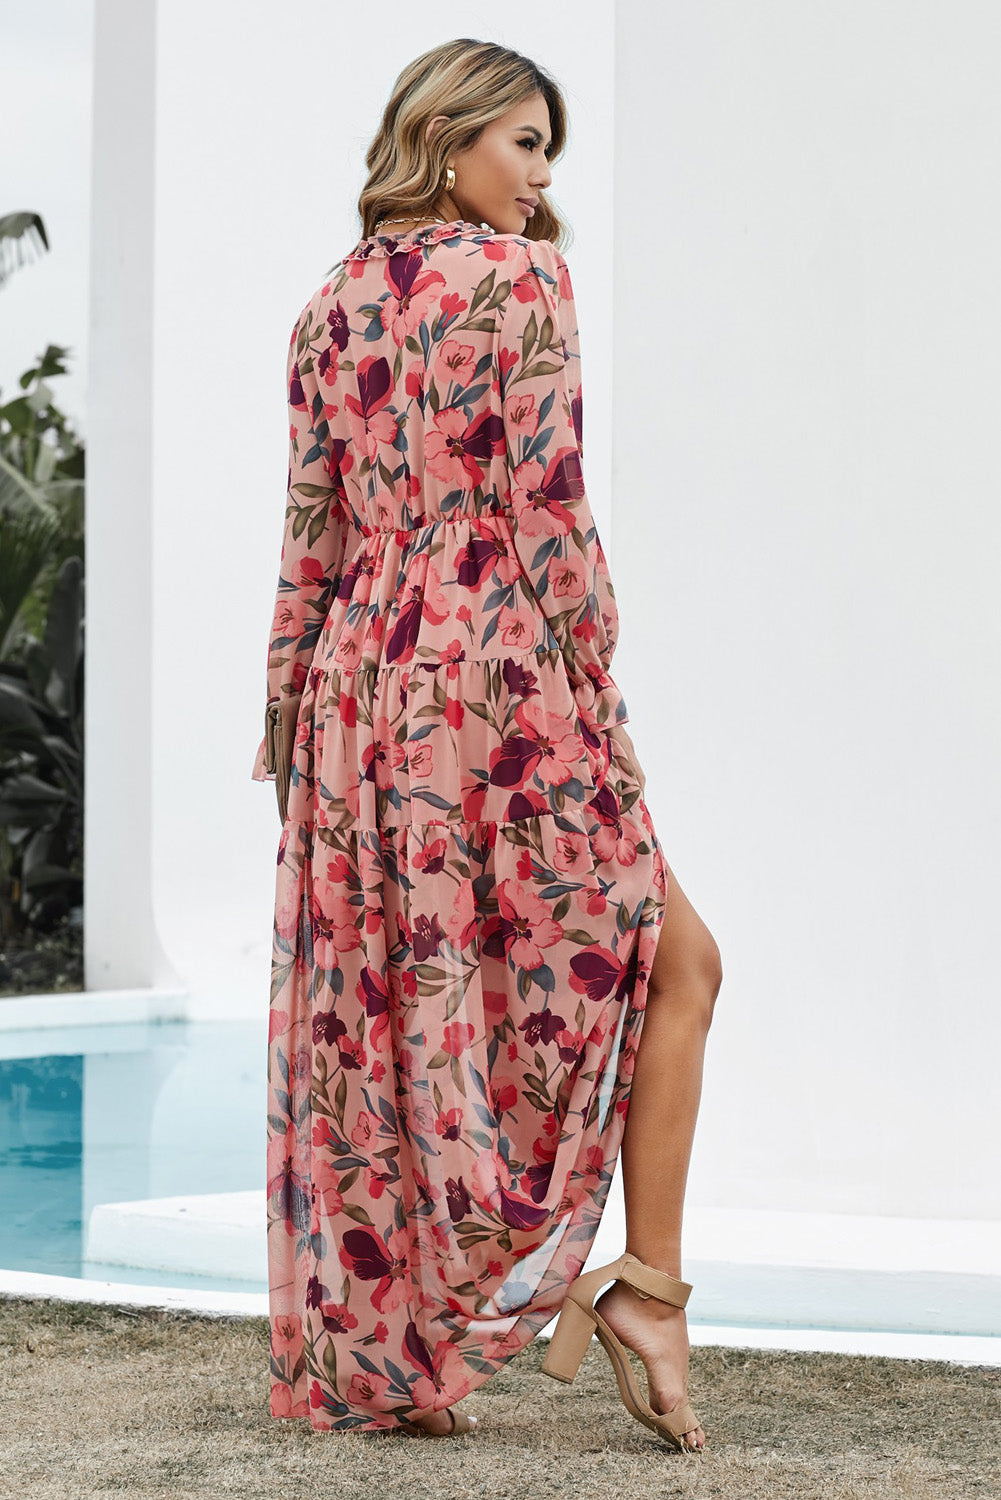 Sleeve Plunge Maxi: A maxi dress featuring a plunging neckline and sleeves, offering an alluring and elegant look.